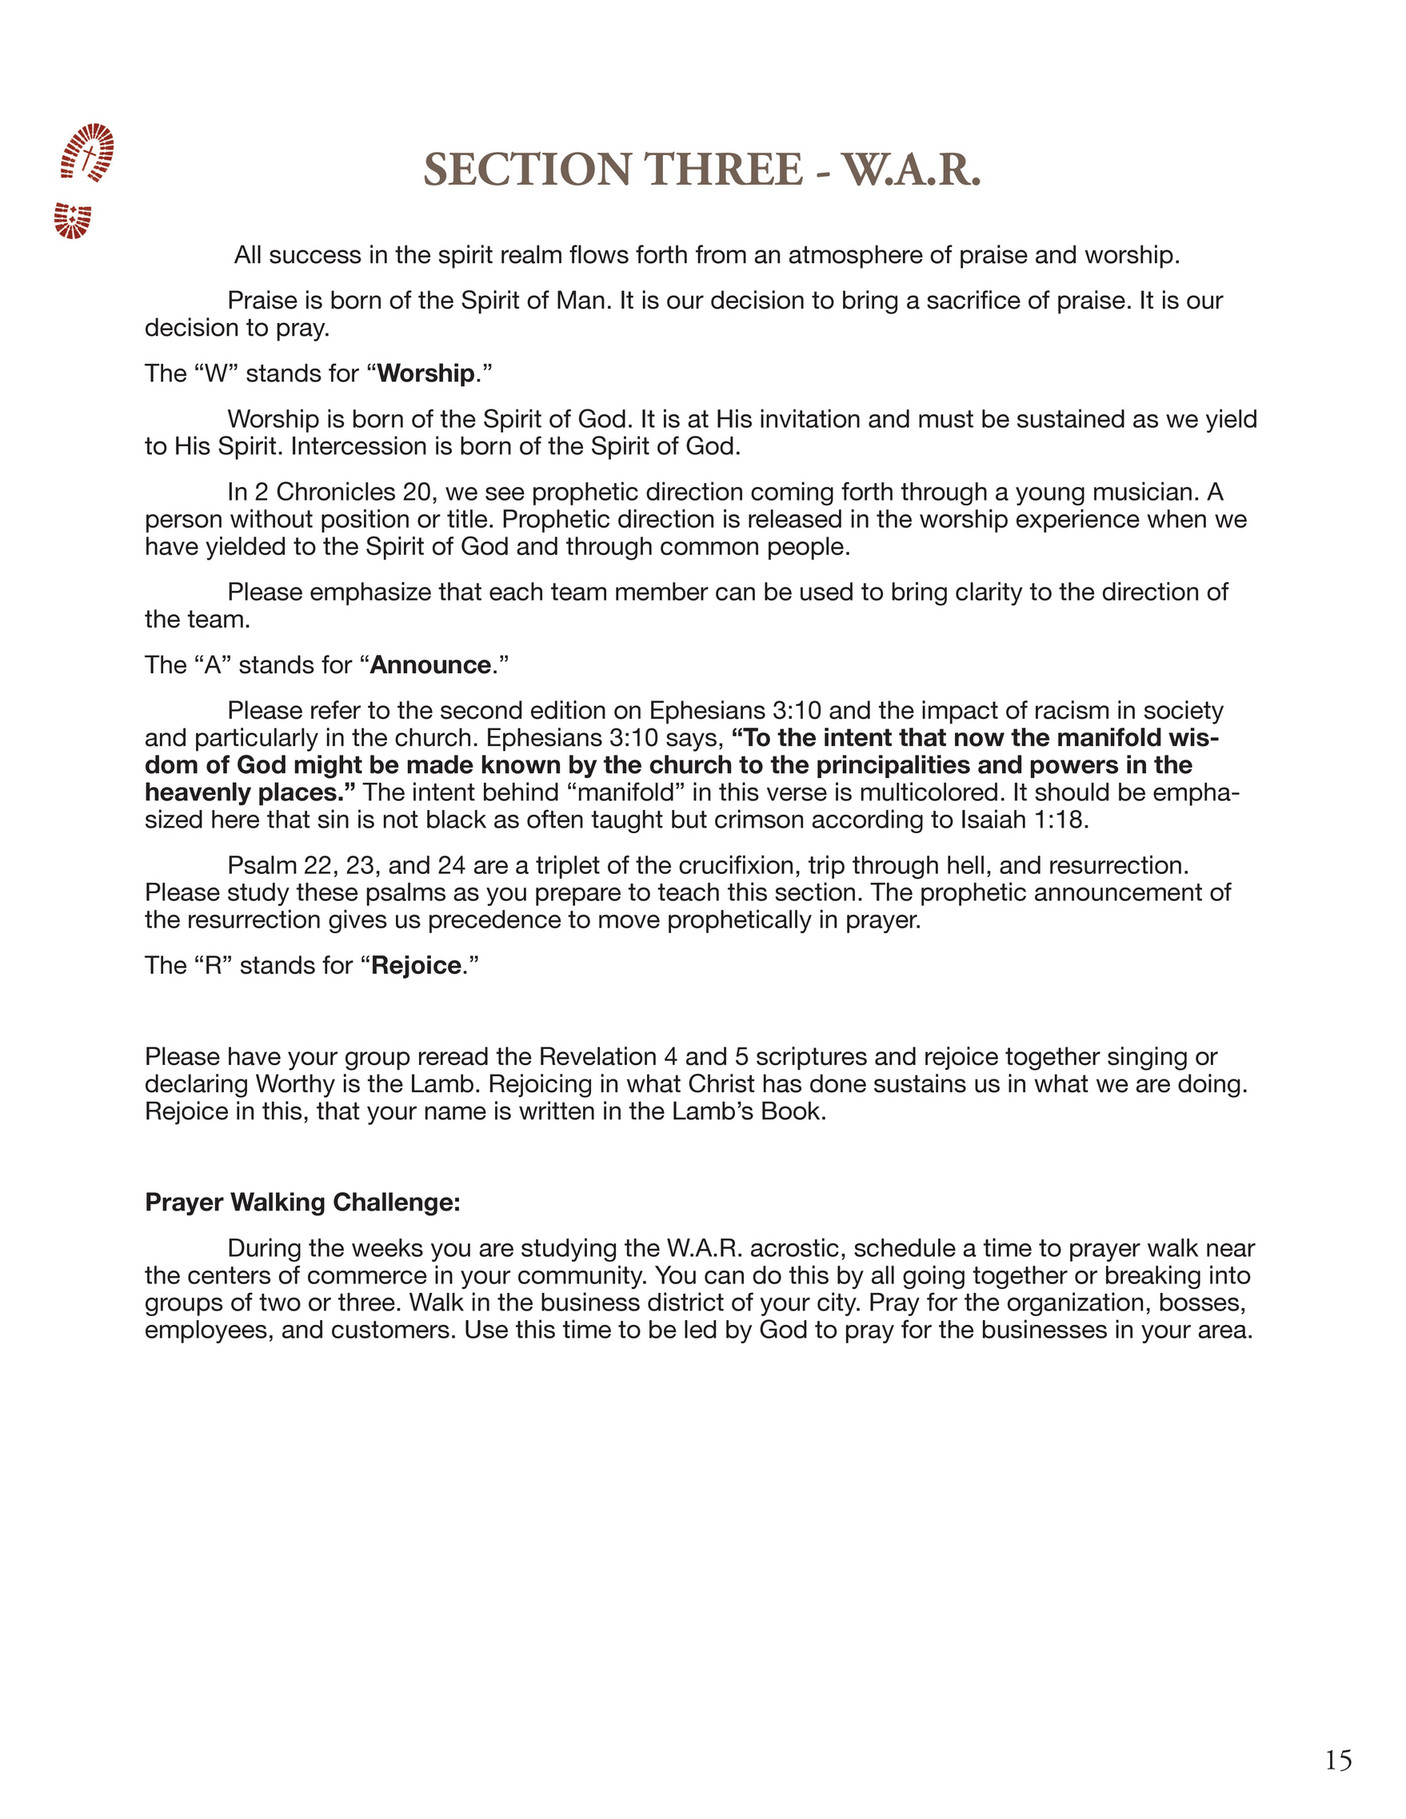 south-east-asia-prayer-center-leader-s-guide-s3-introduction-page-1